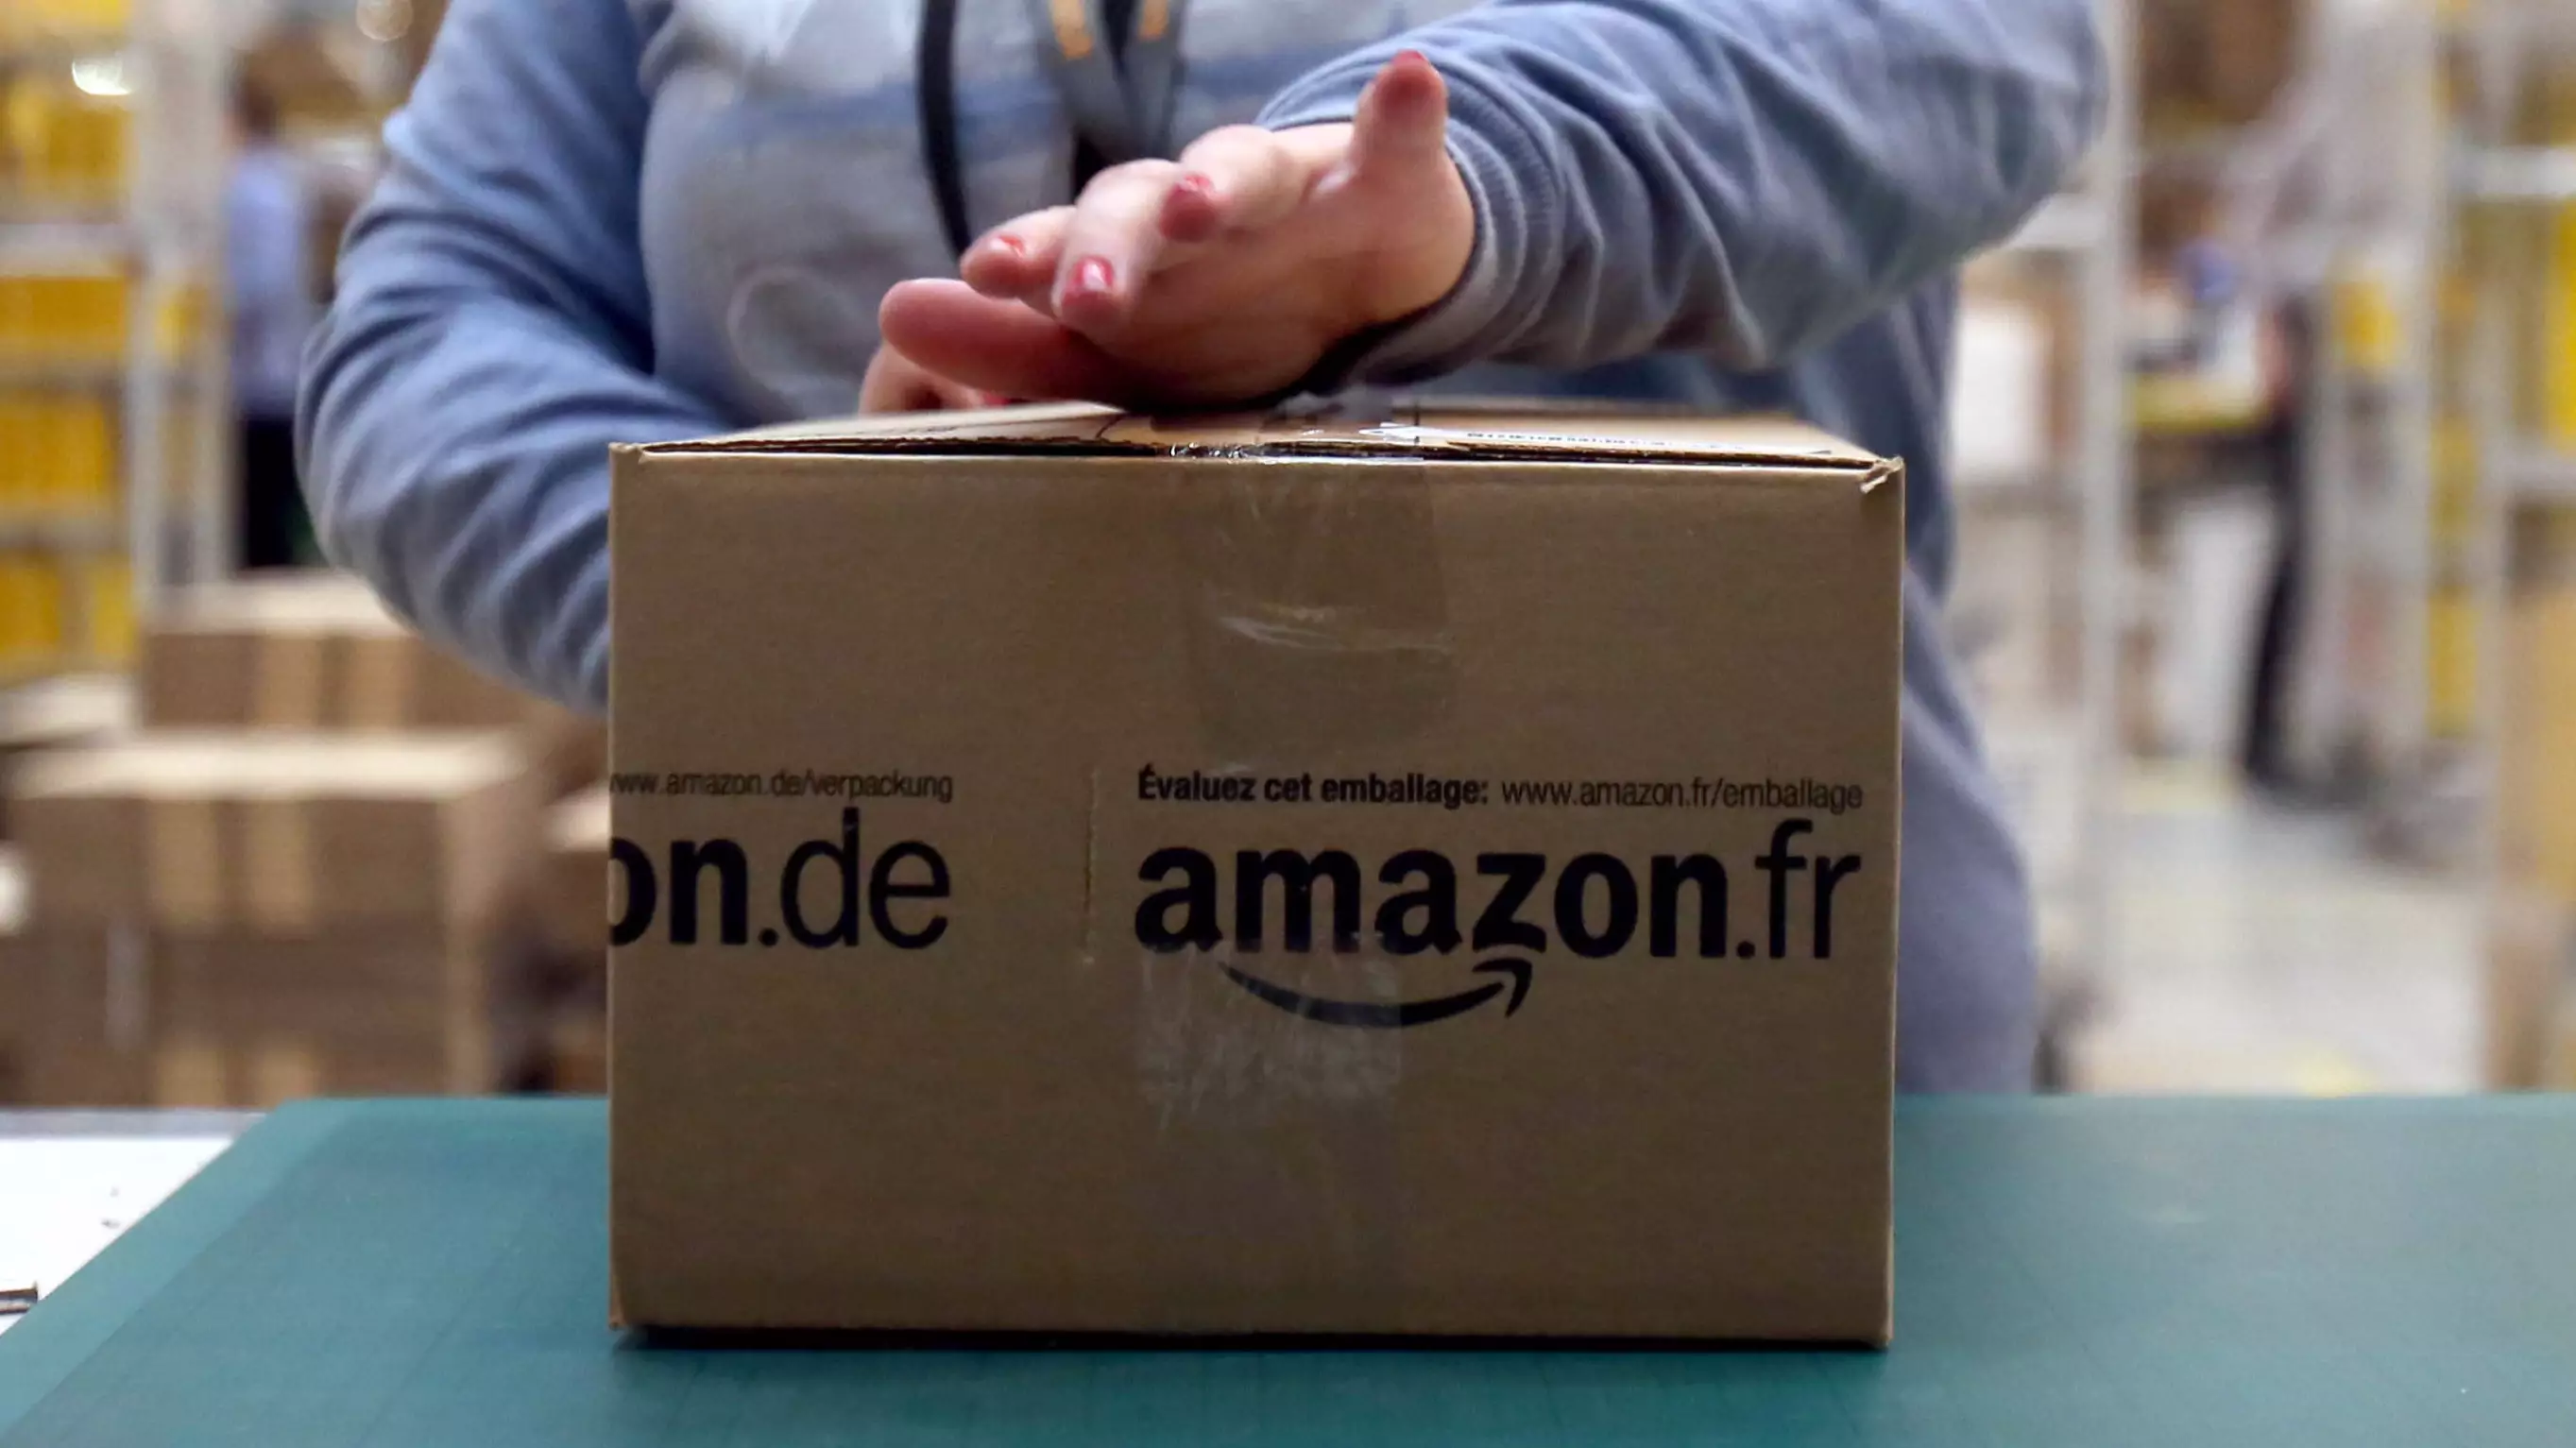 Amazon Is Finally Coming To Australia, But Not Completely